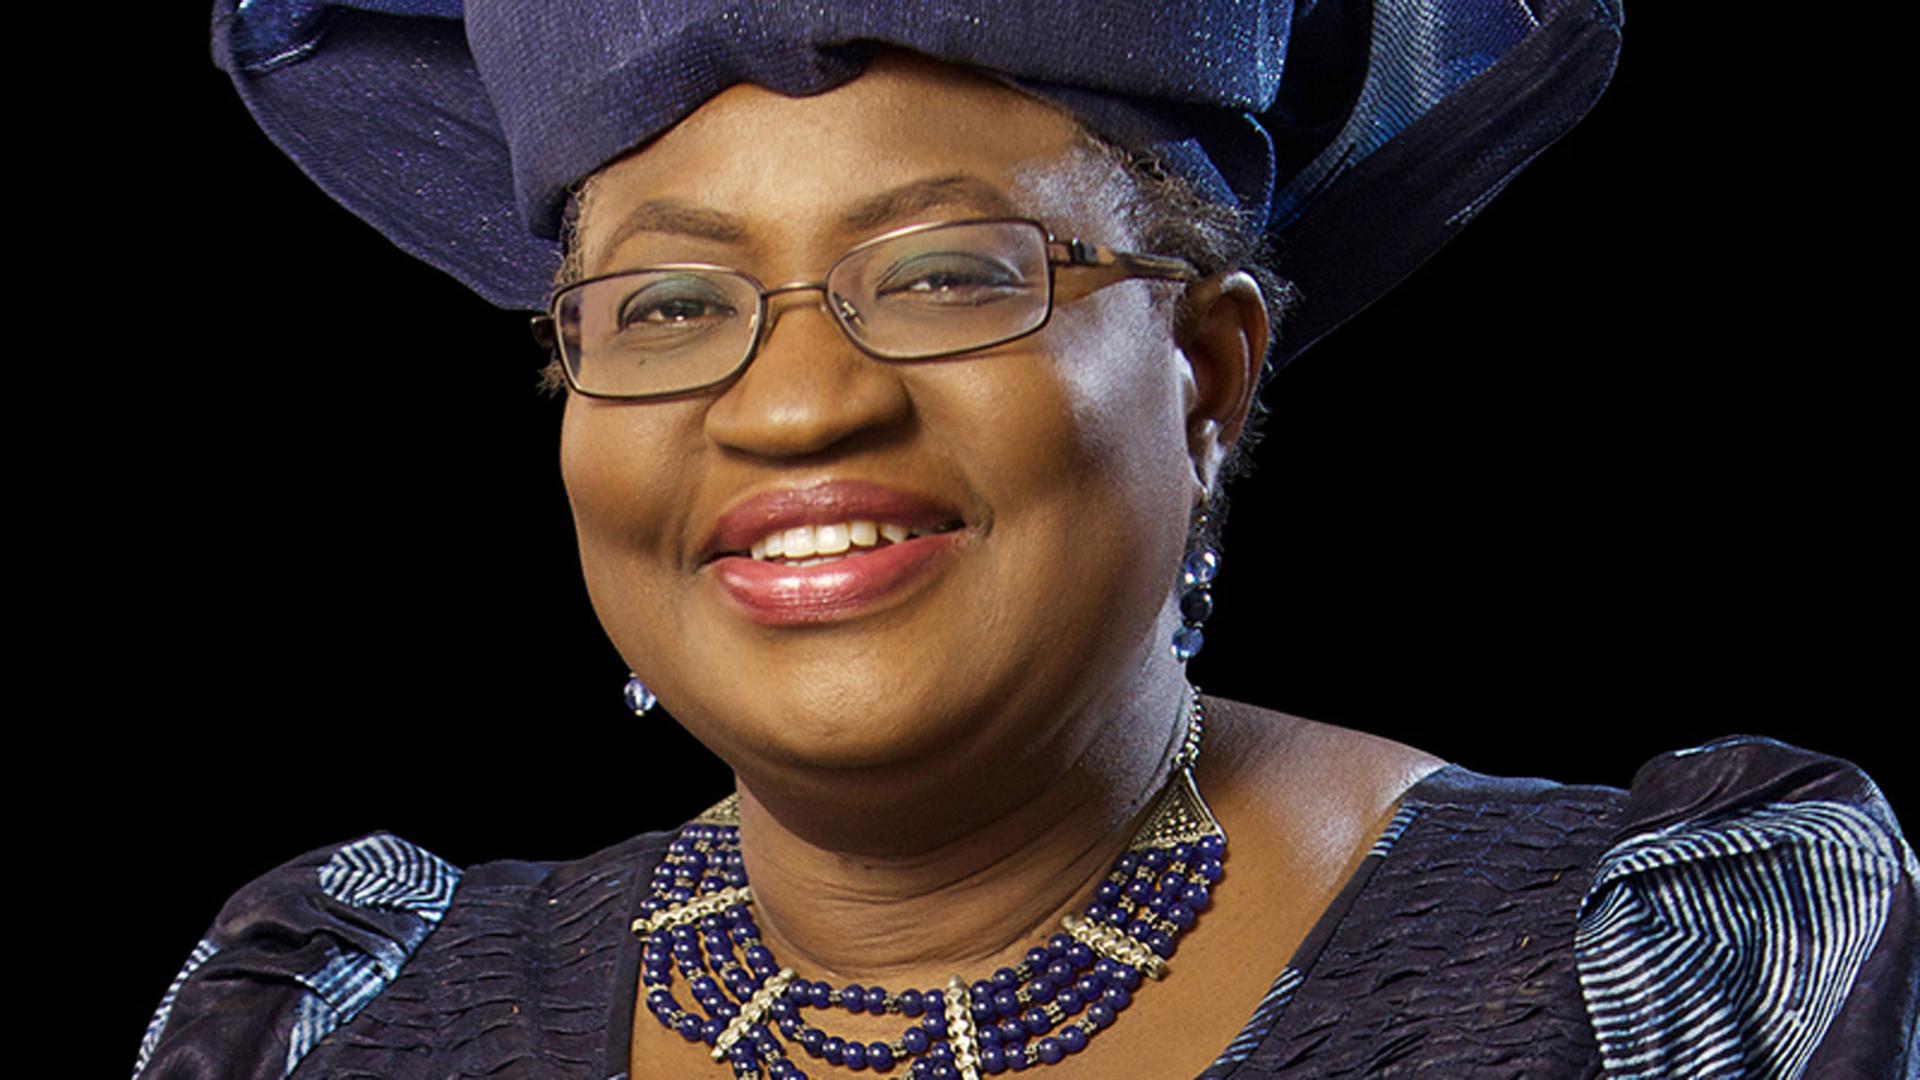 Author Ngozi Okonjo-Iweala poses for the camera in a dark blue outfit